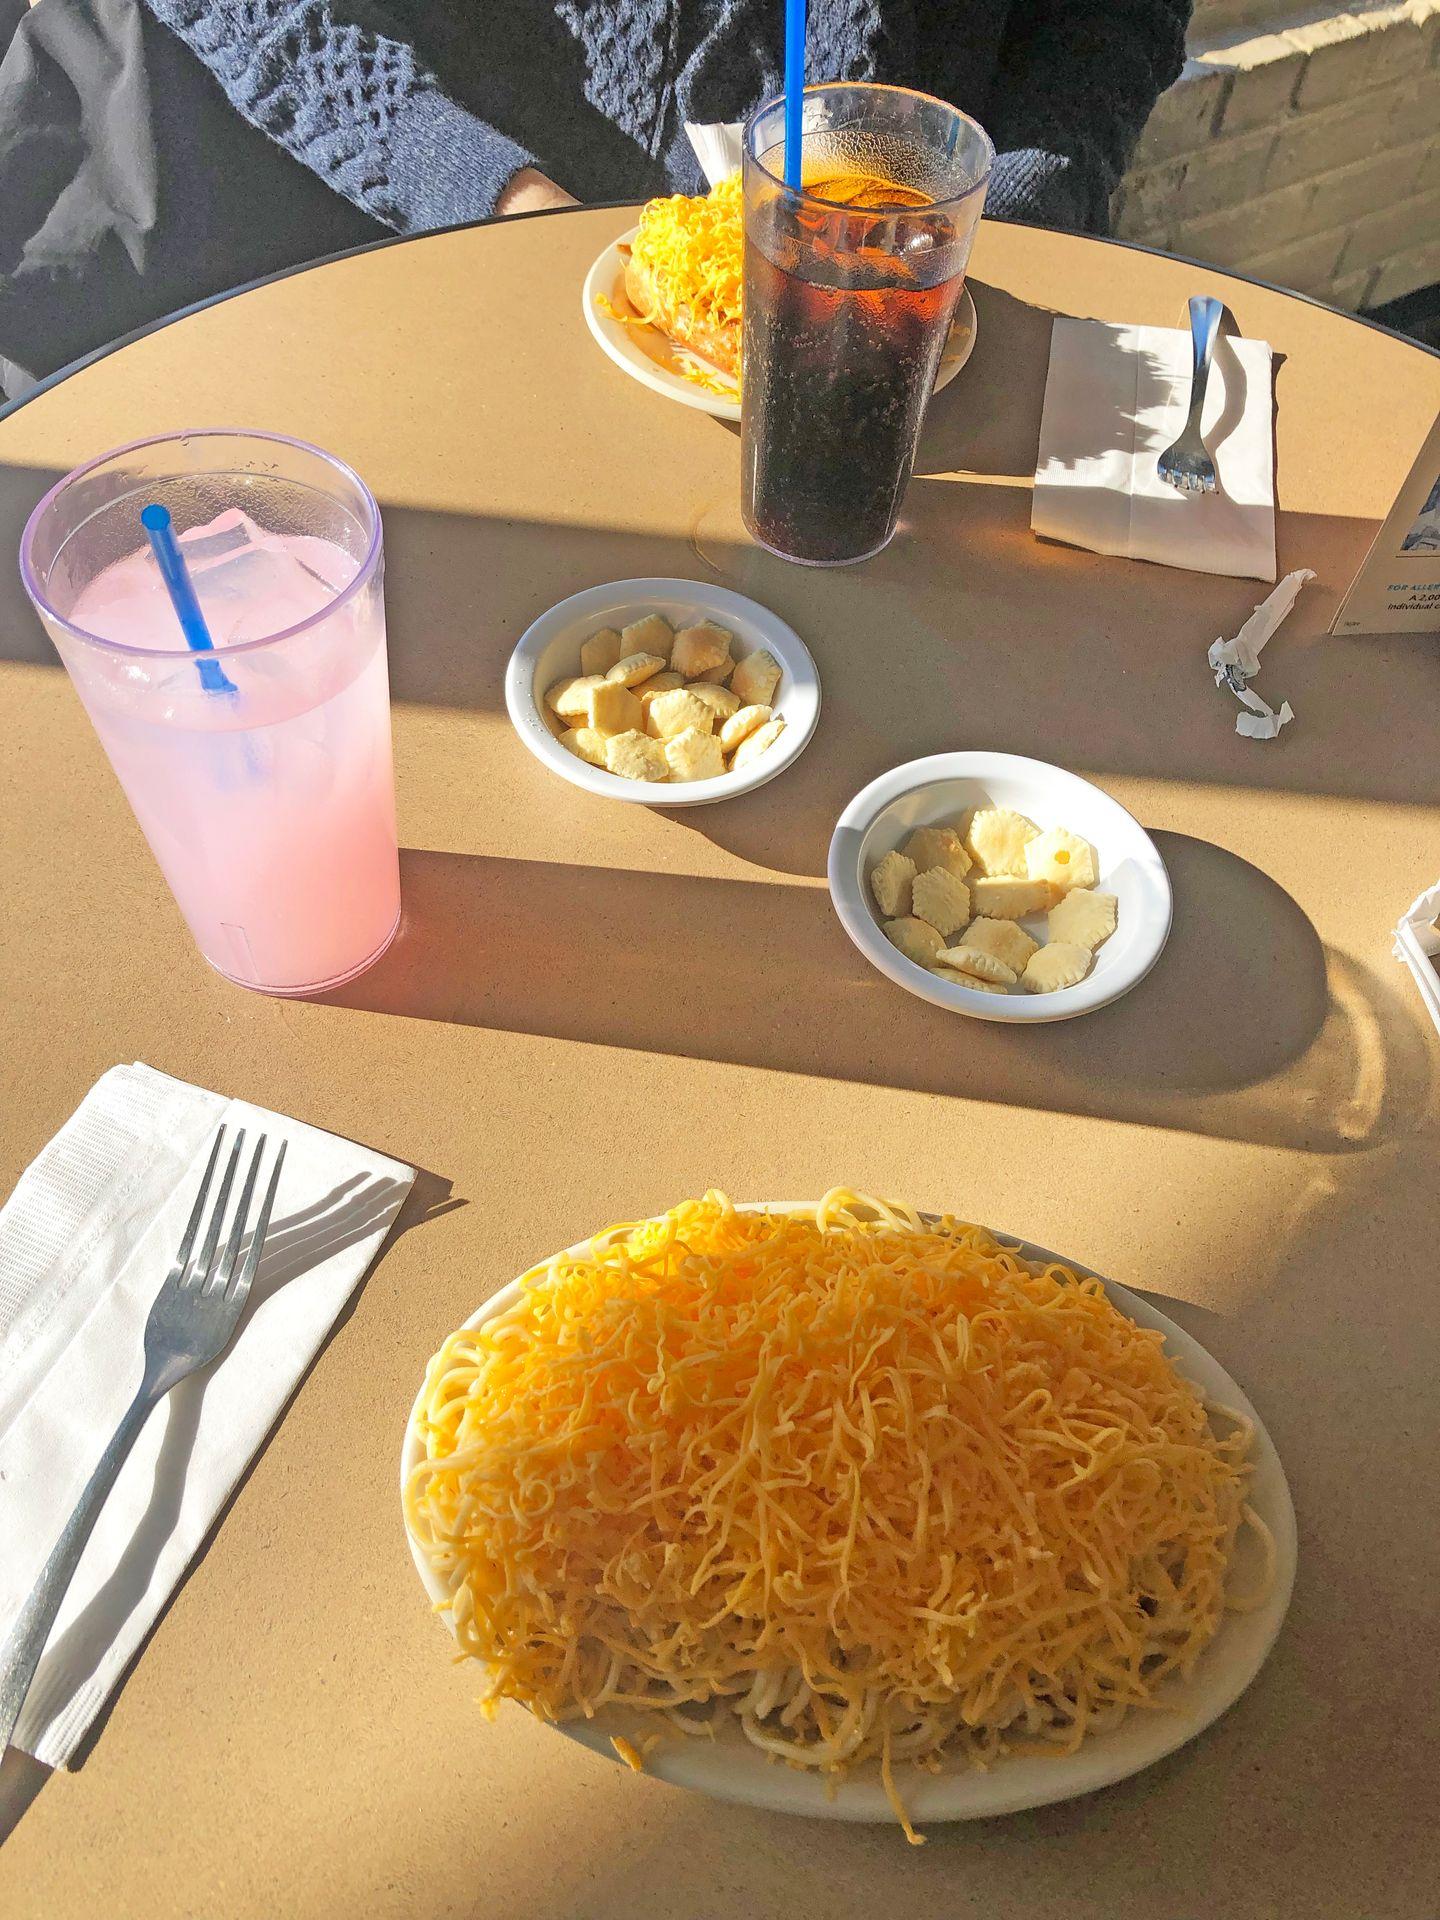 A table with skyline chili covered in cheese and oyster crackers at Skyline.